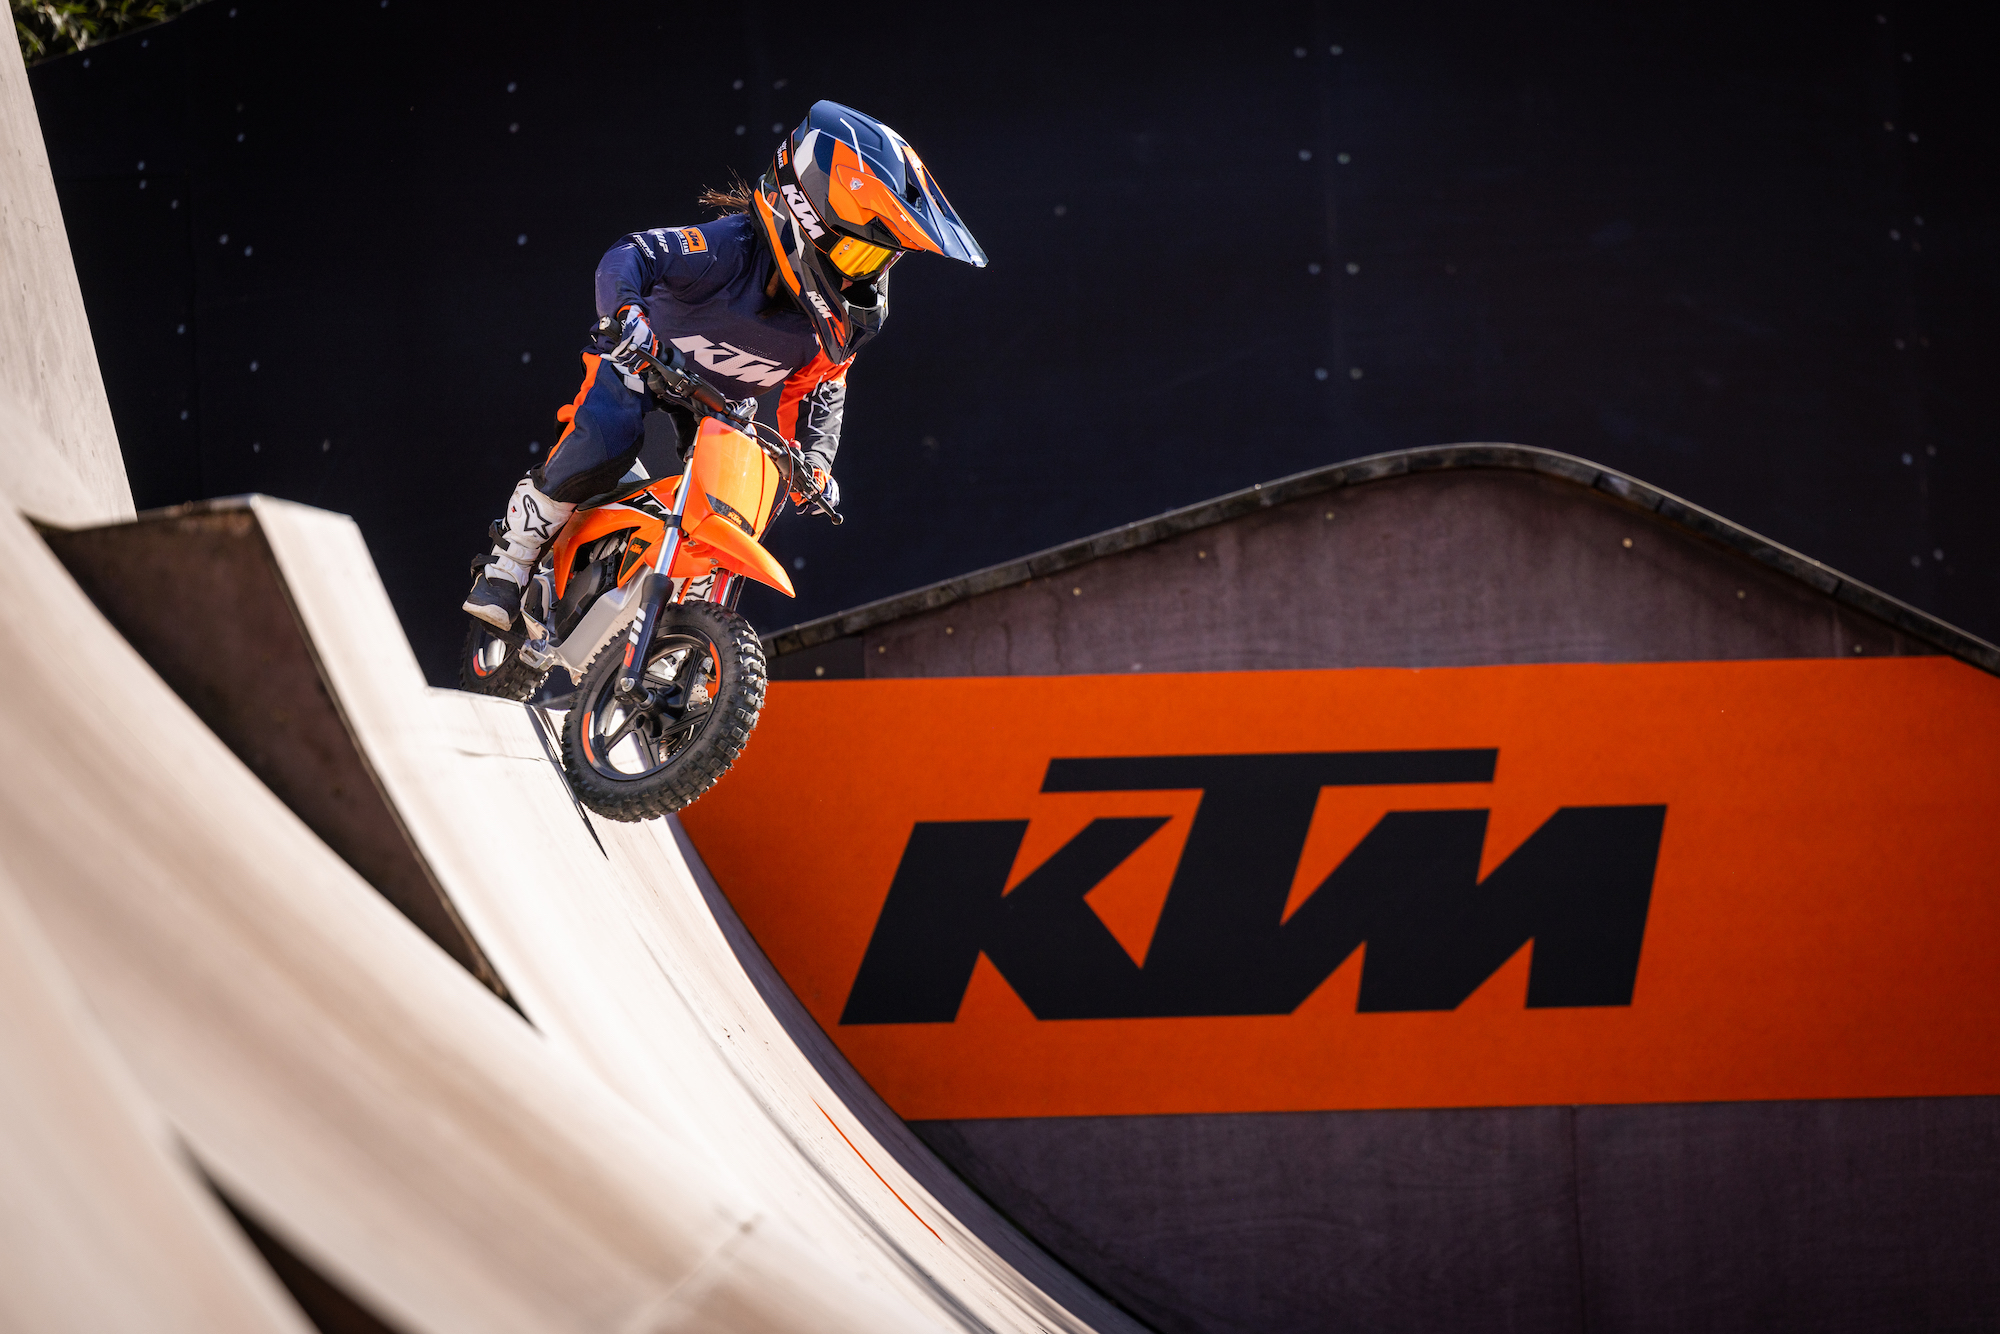 A view of KTM's all-new SX-E 2 racer. All media provided by KTM.